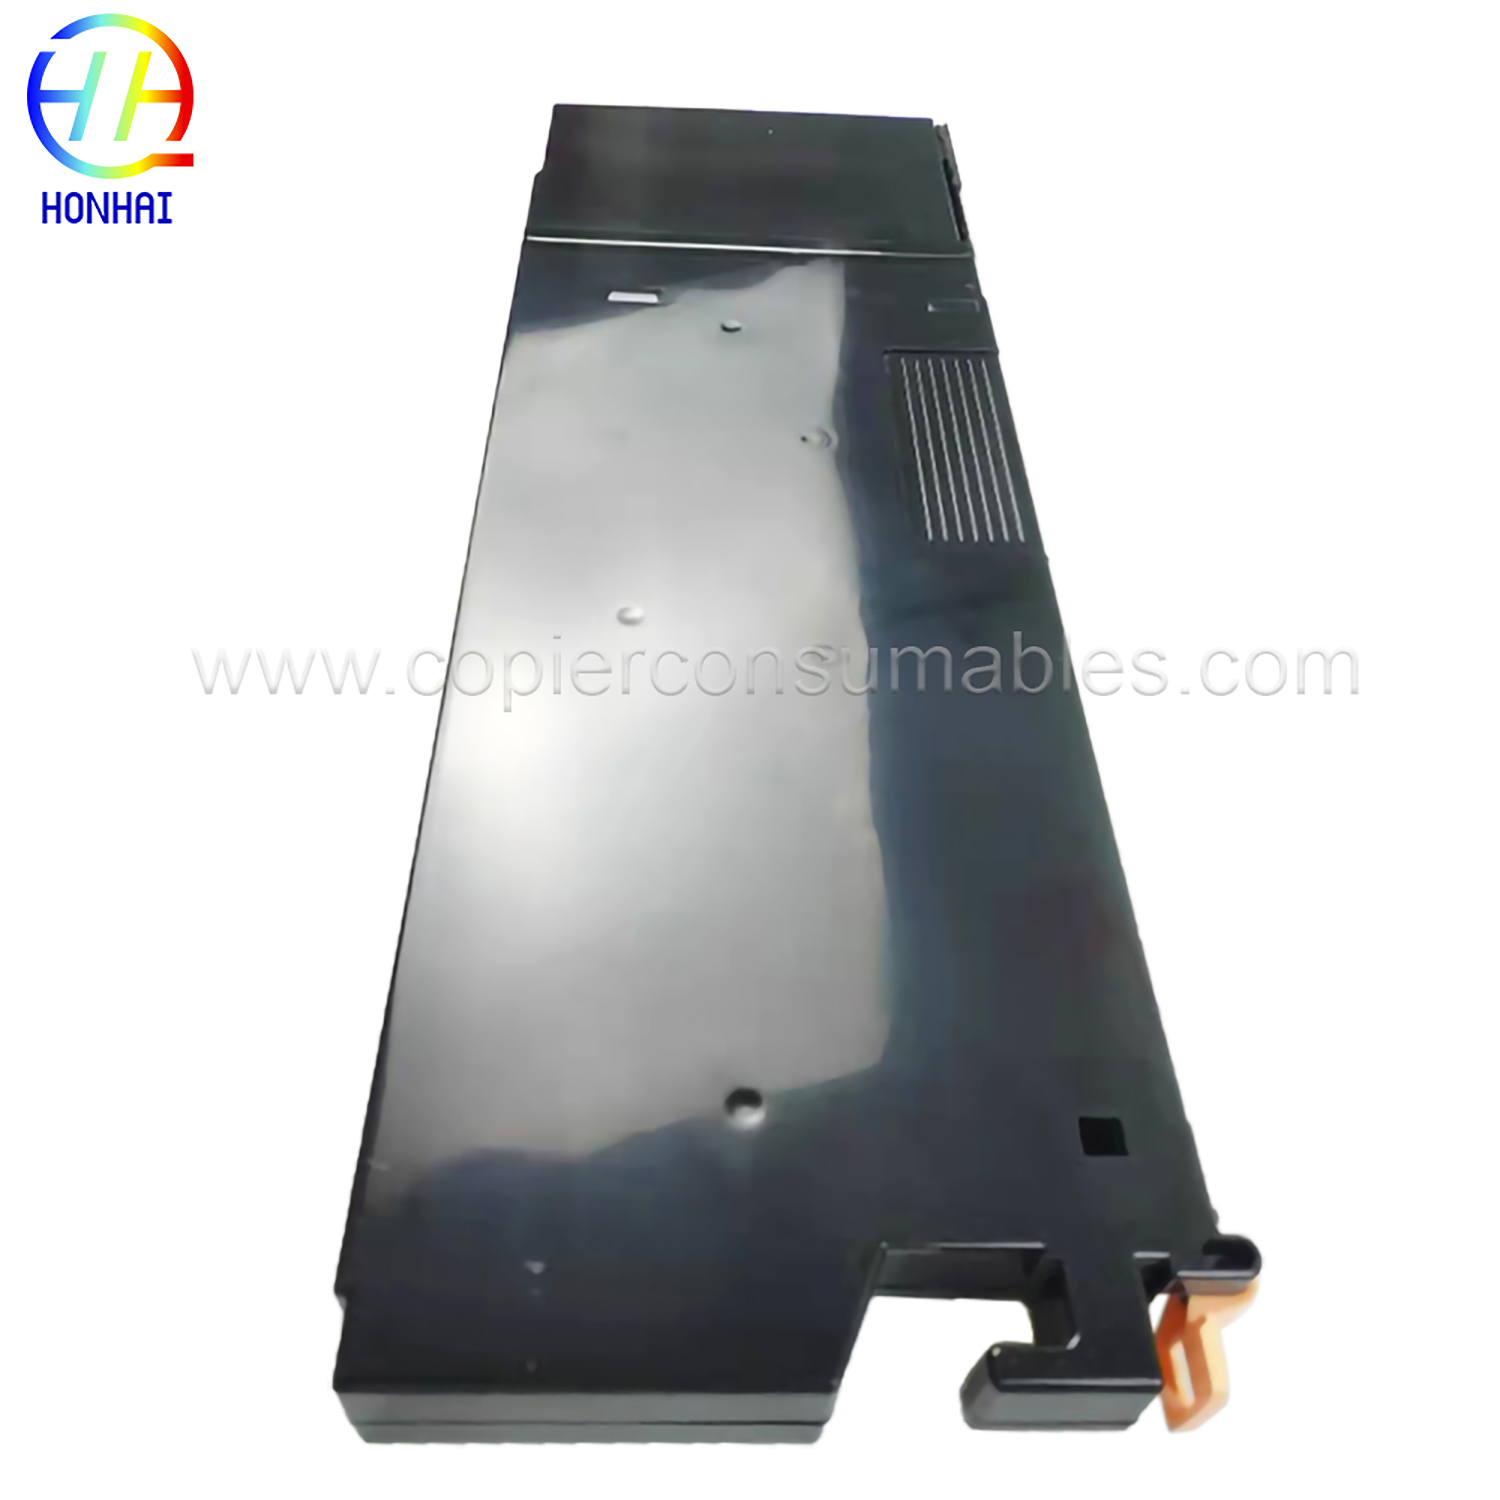 Waste Tone Container Original for Xerox 4110 4127 4590 4595 D110 D125 D136 D95 ED125 ED95A 008R13036 (3) 拷贝